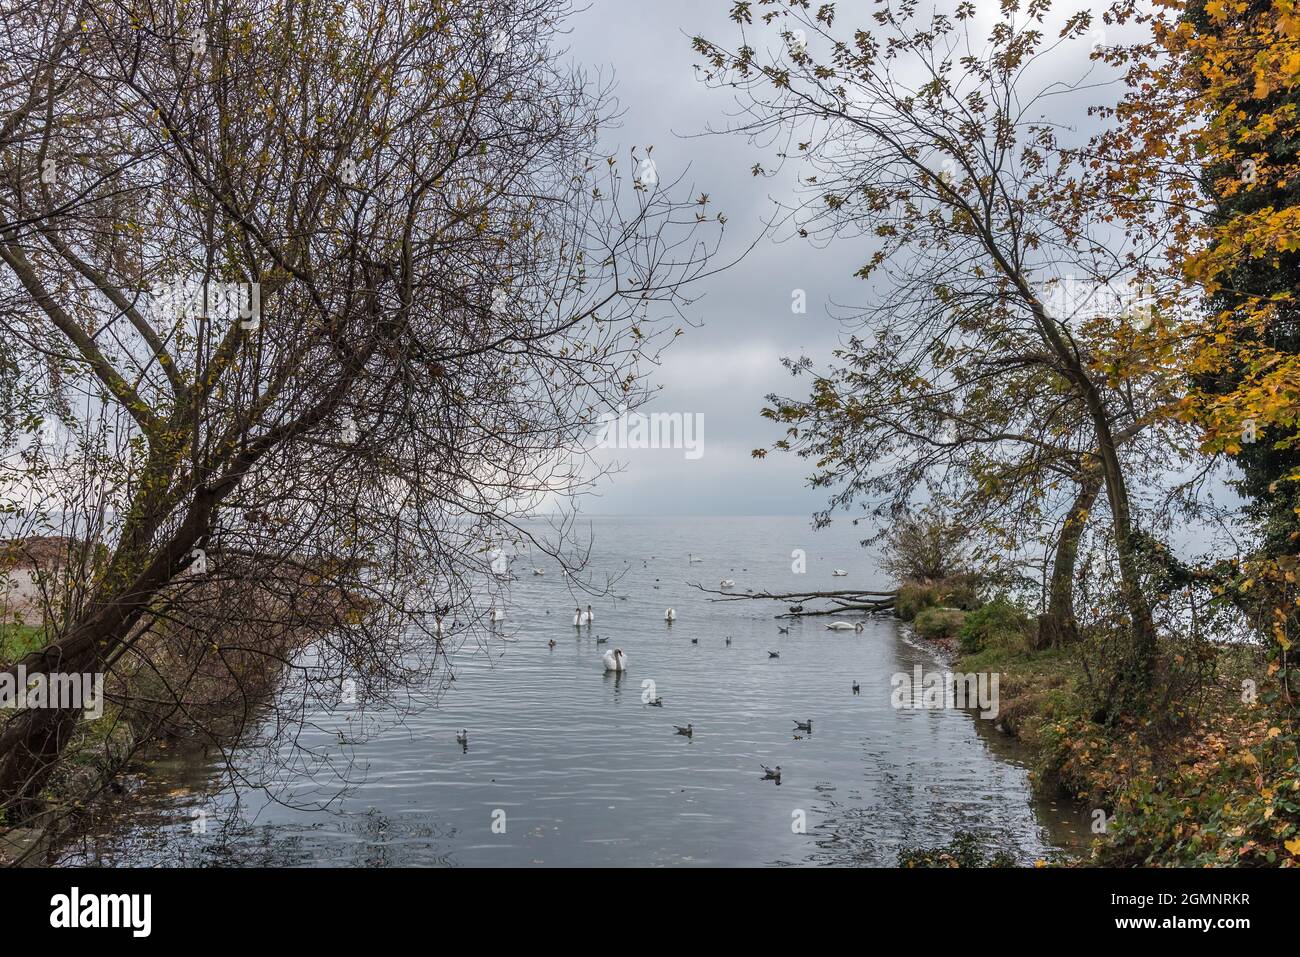 Some swans and birds floating near the end of the river that meets the open sea with some trees on both sides. Concept of animals and landscape. Stock Photo